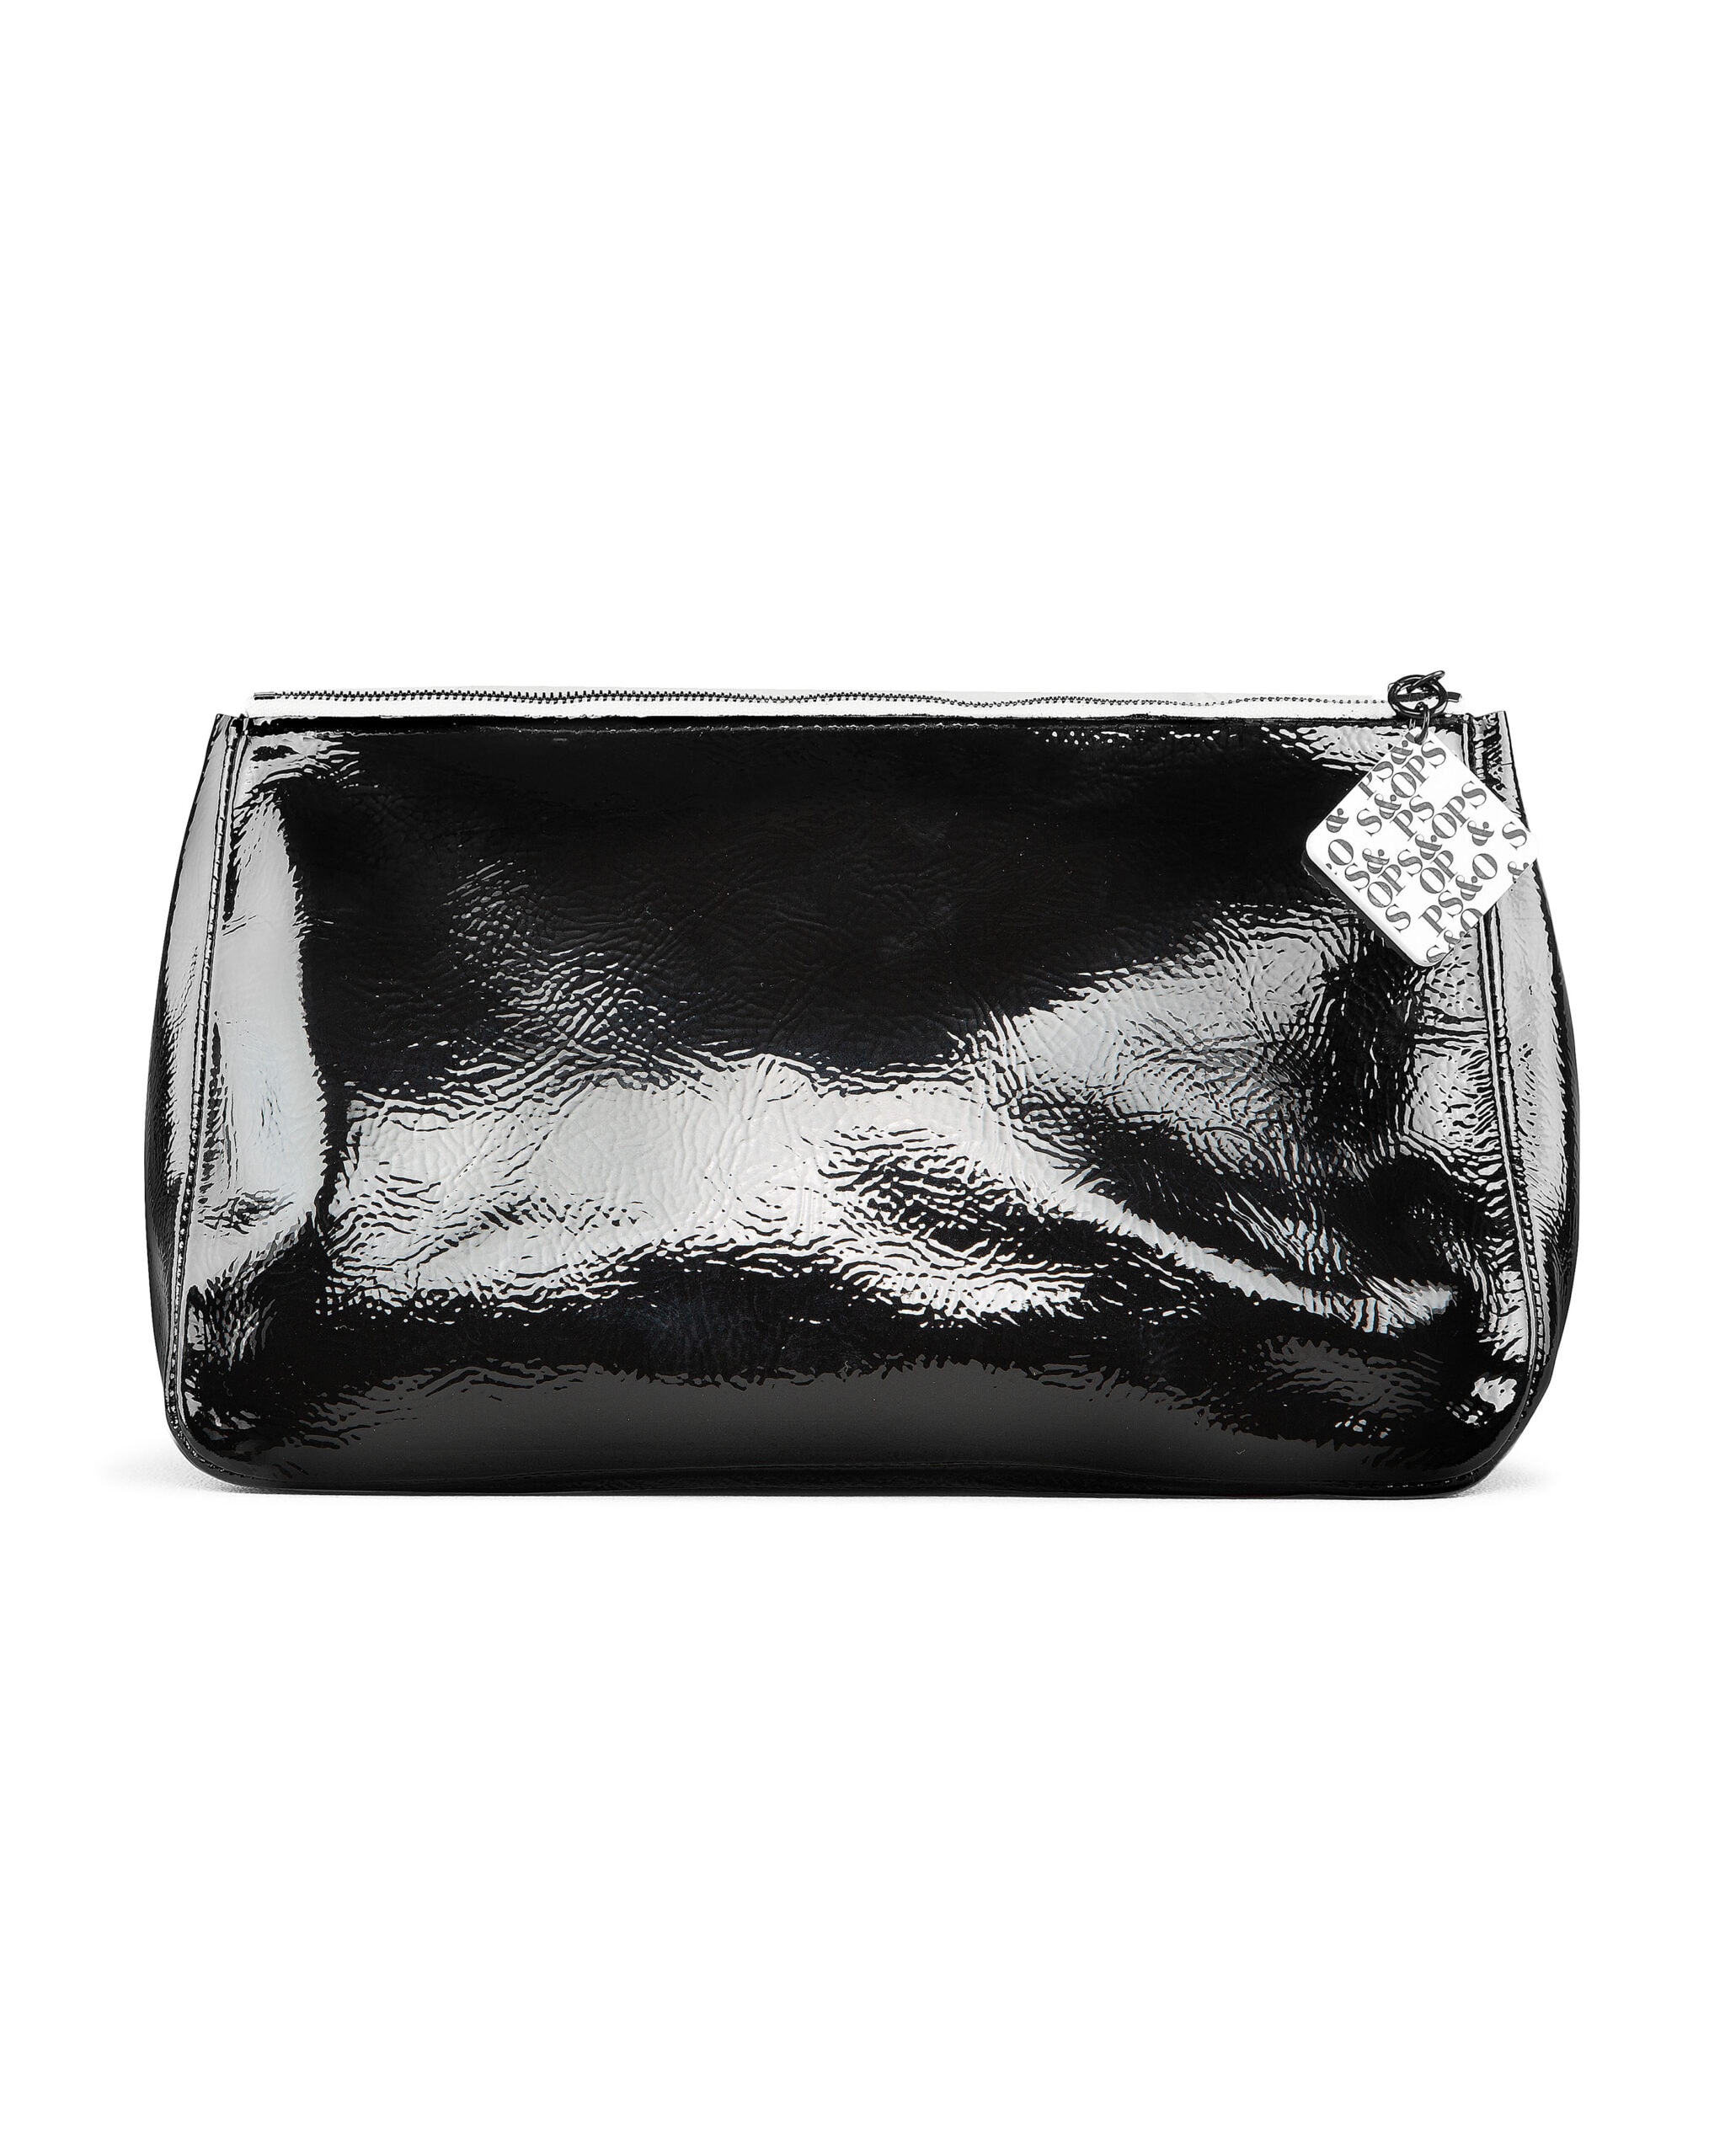 Ops&Ops No101 Liquorice patent leather clutch with Tatty Devine made black on white zip pull